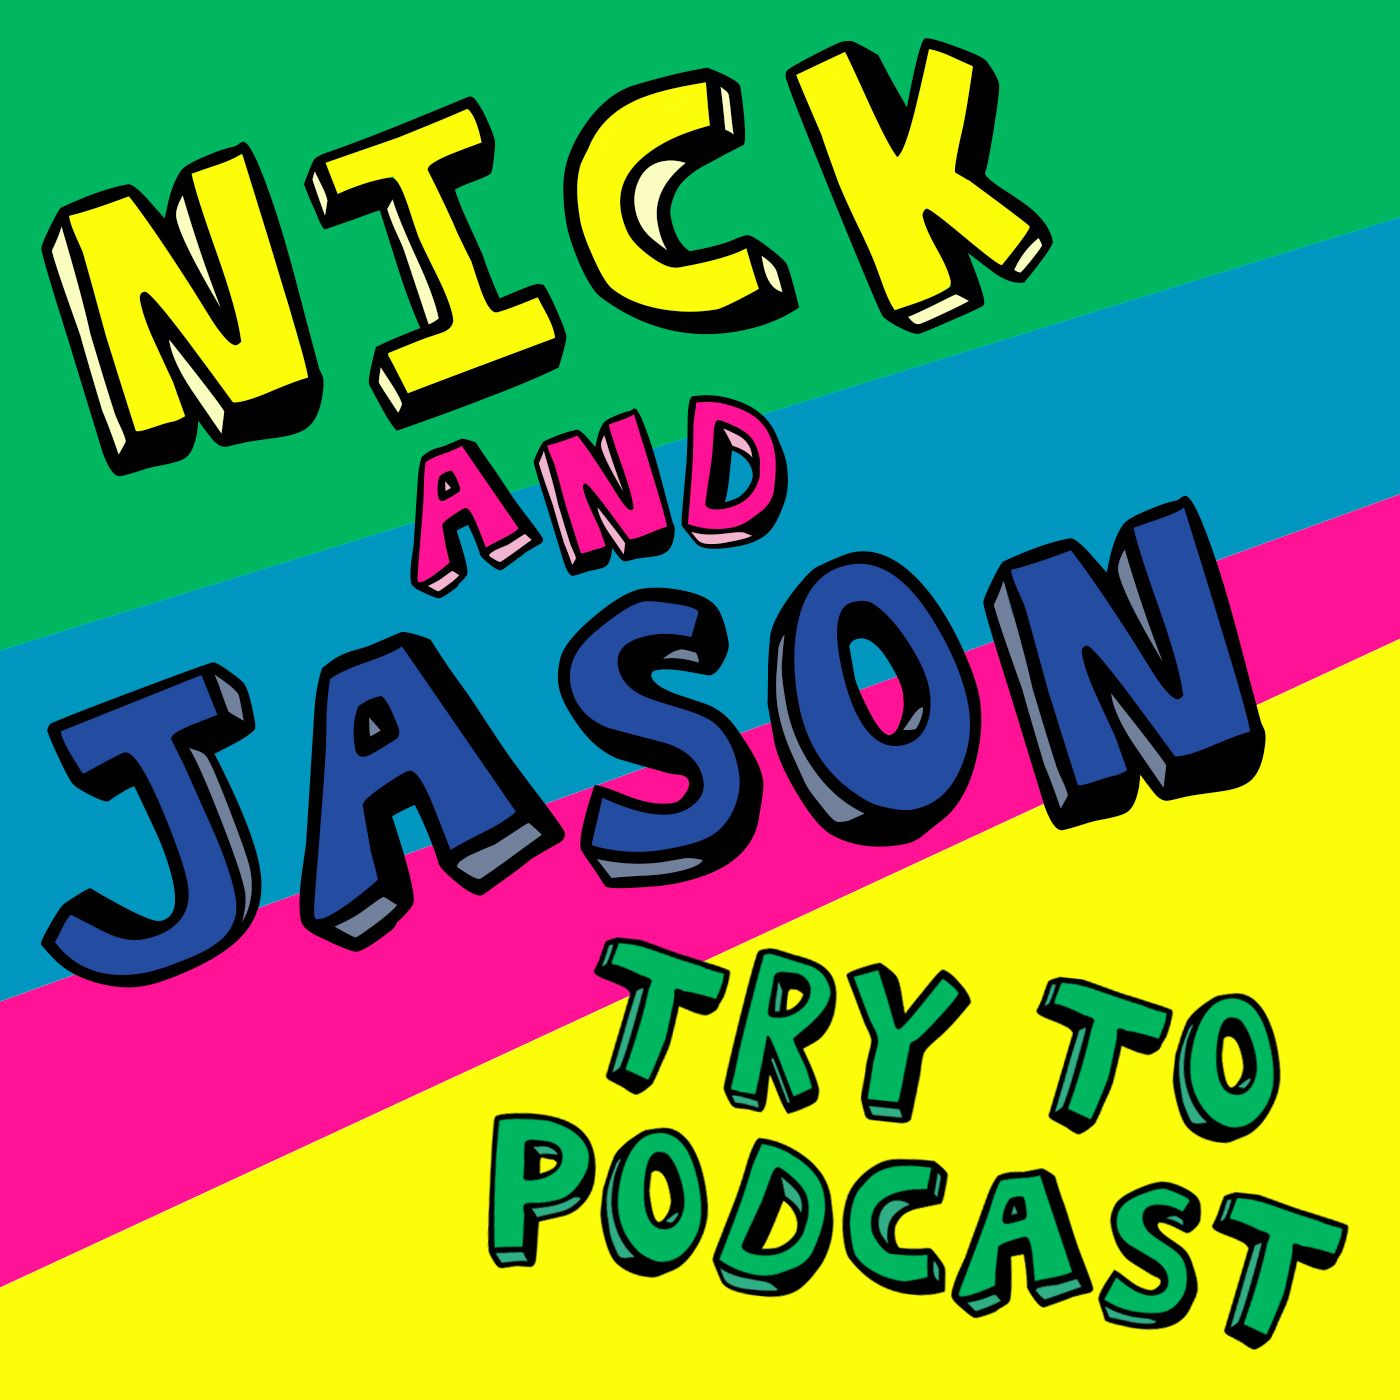 Nick & Jason Try to Podcast